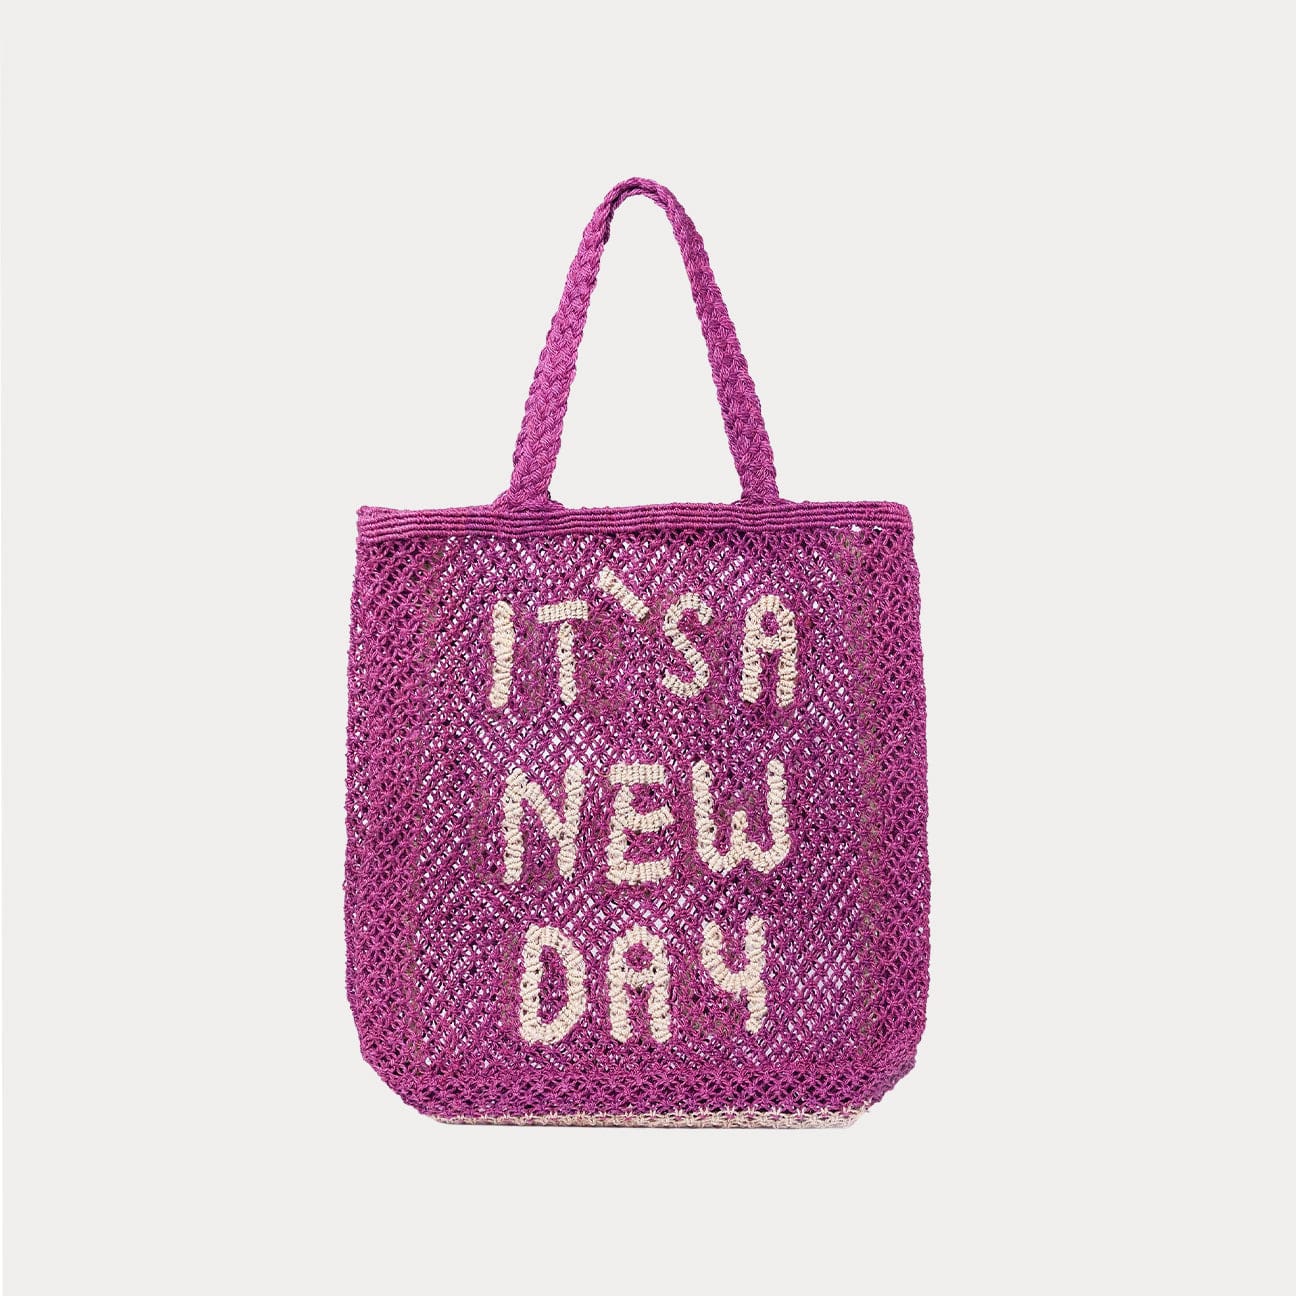 THE JACKSONS Borsa It's a new Day Viola